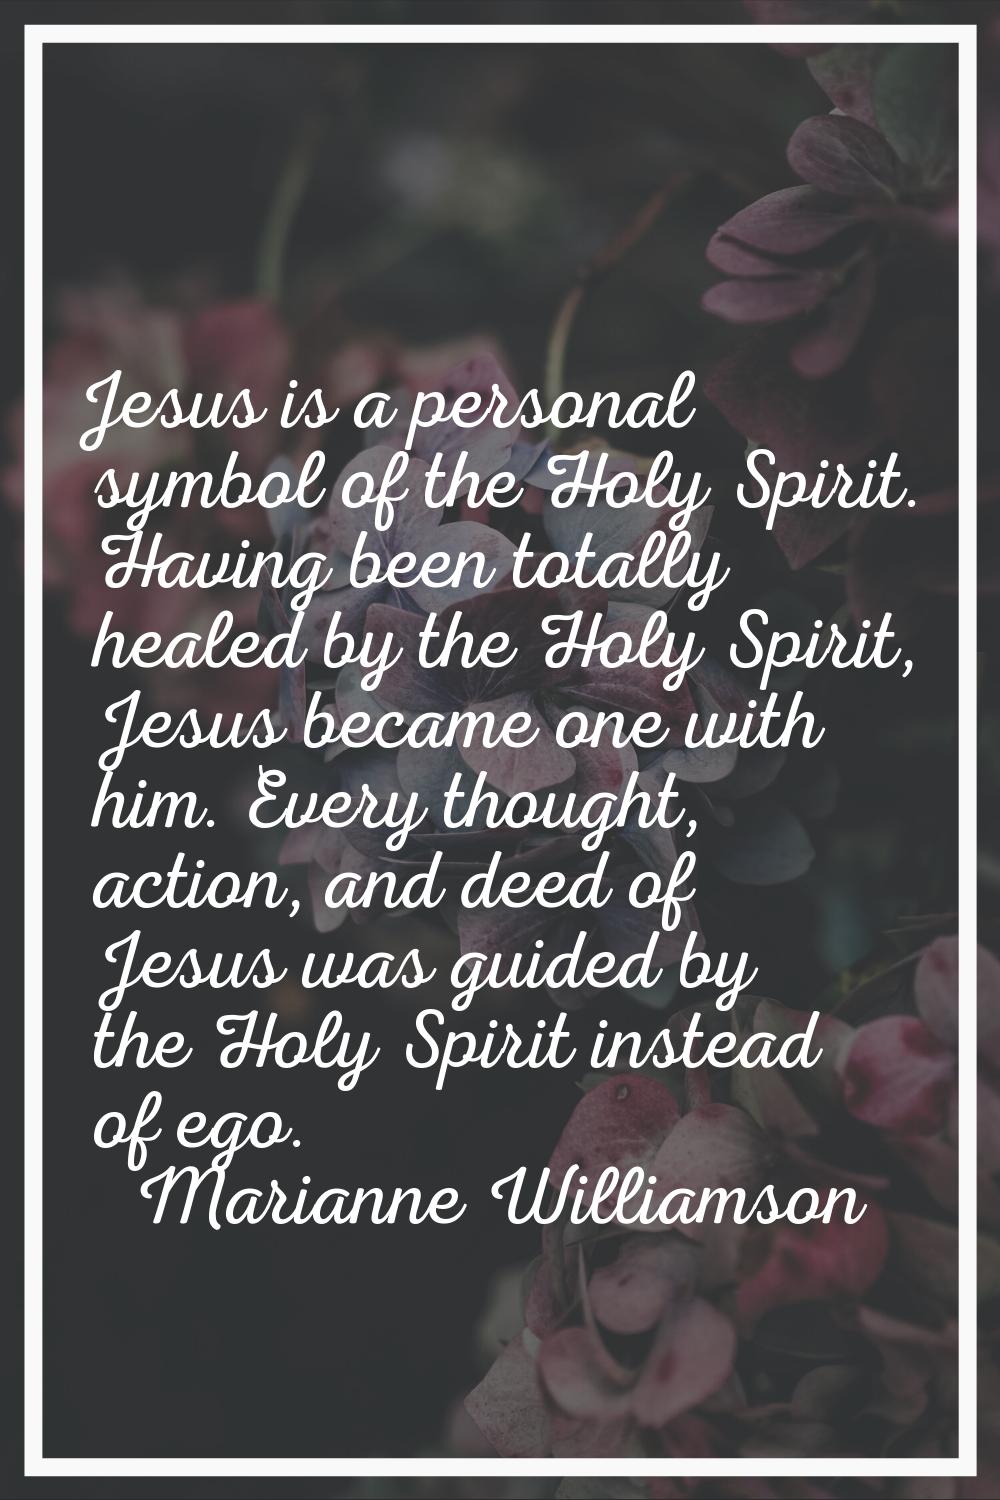 Jesus is a personal symbol of the Holy Spirit. Having been totally healed by the Holy Spirit, Jesus